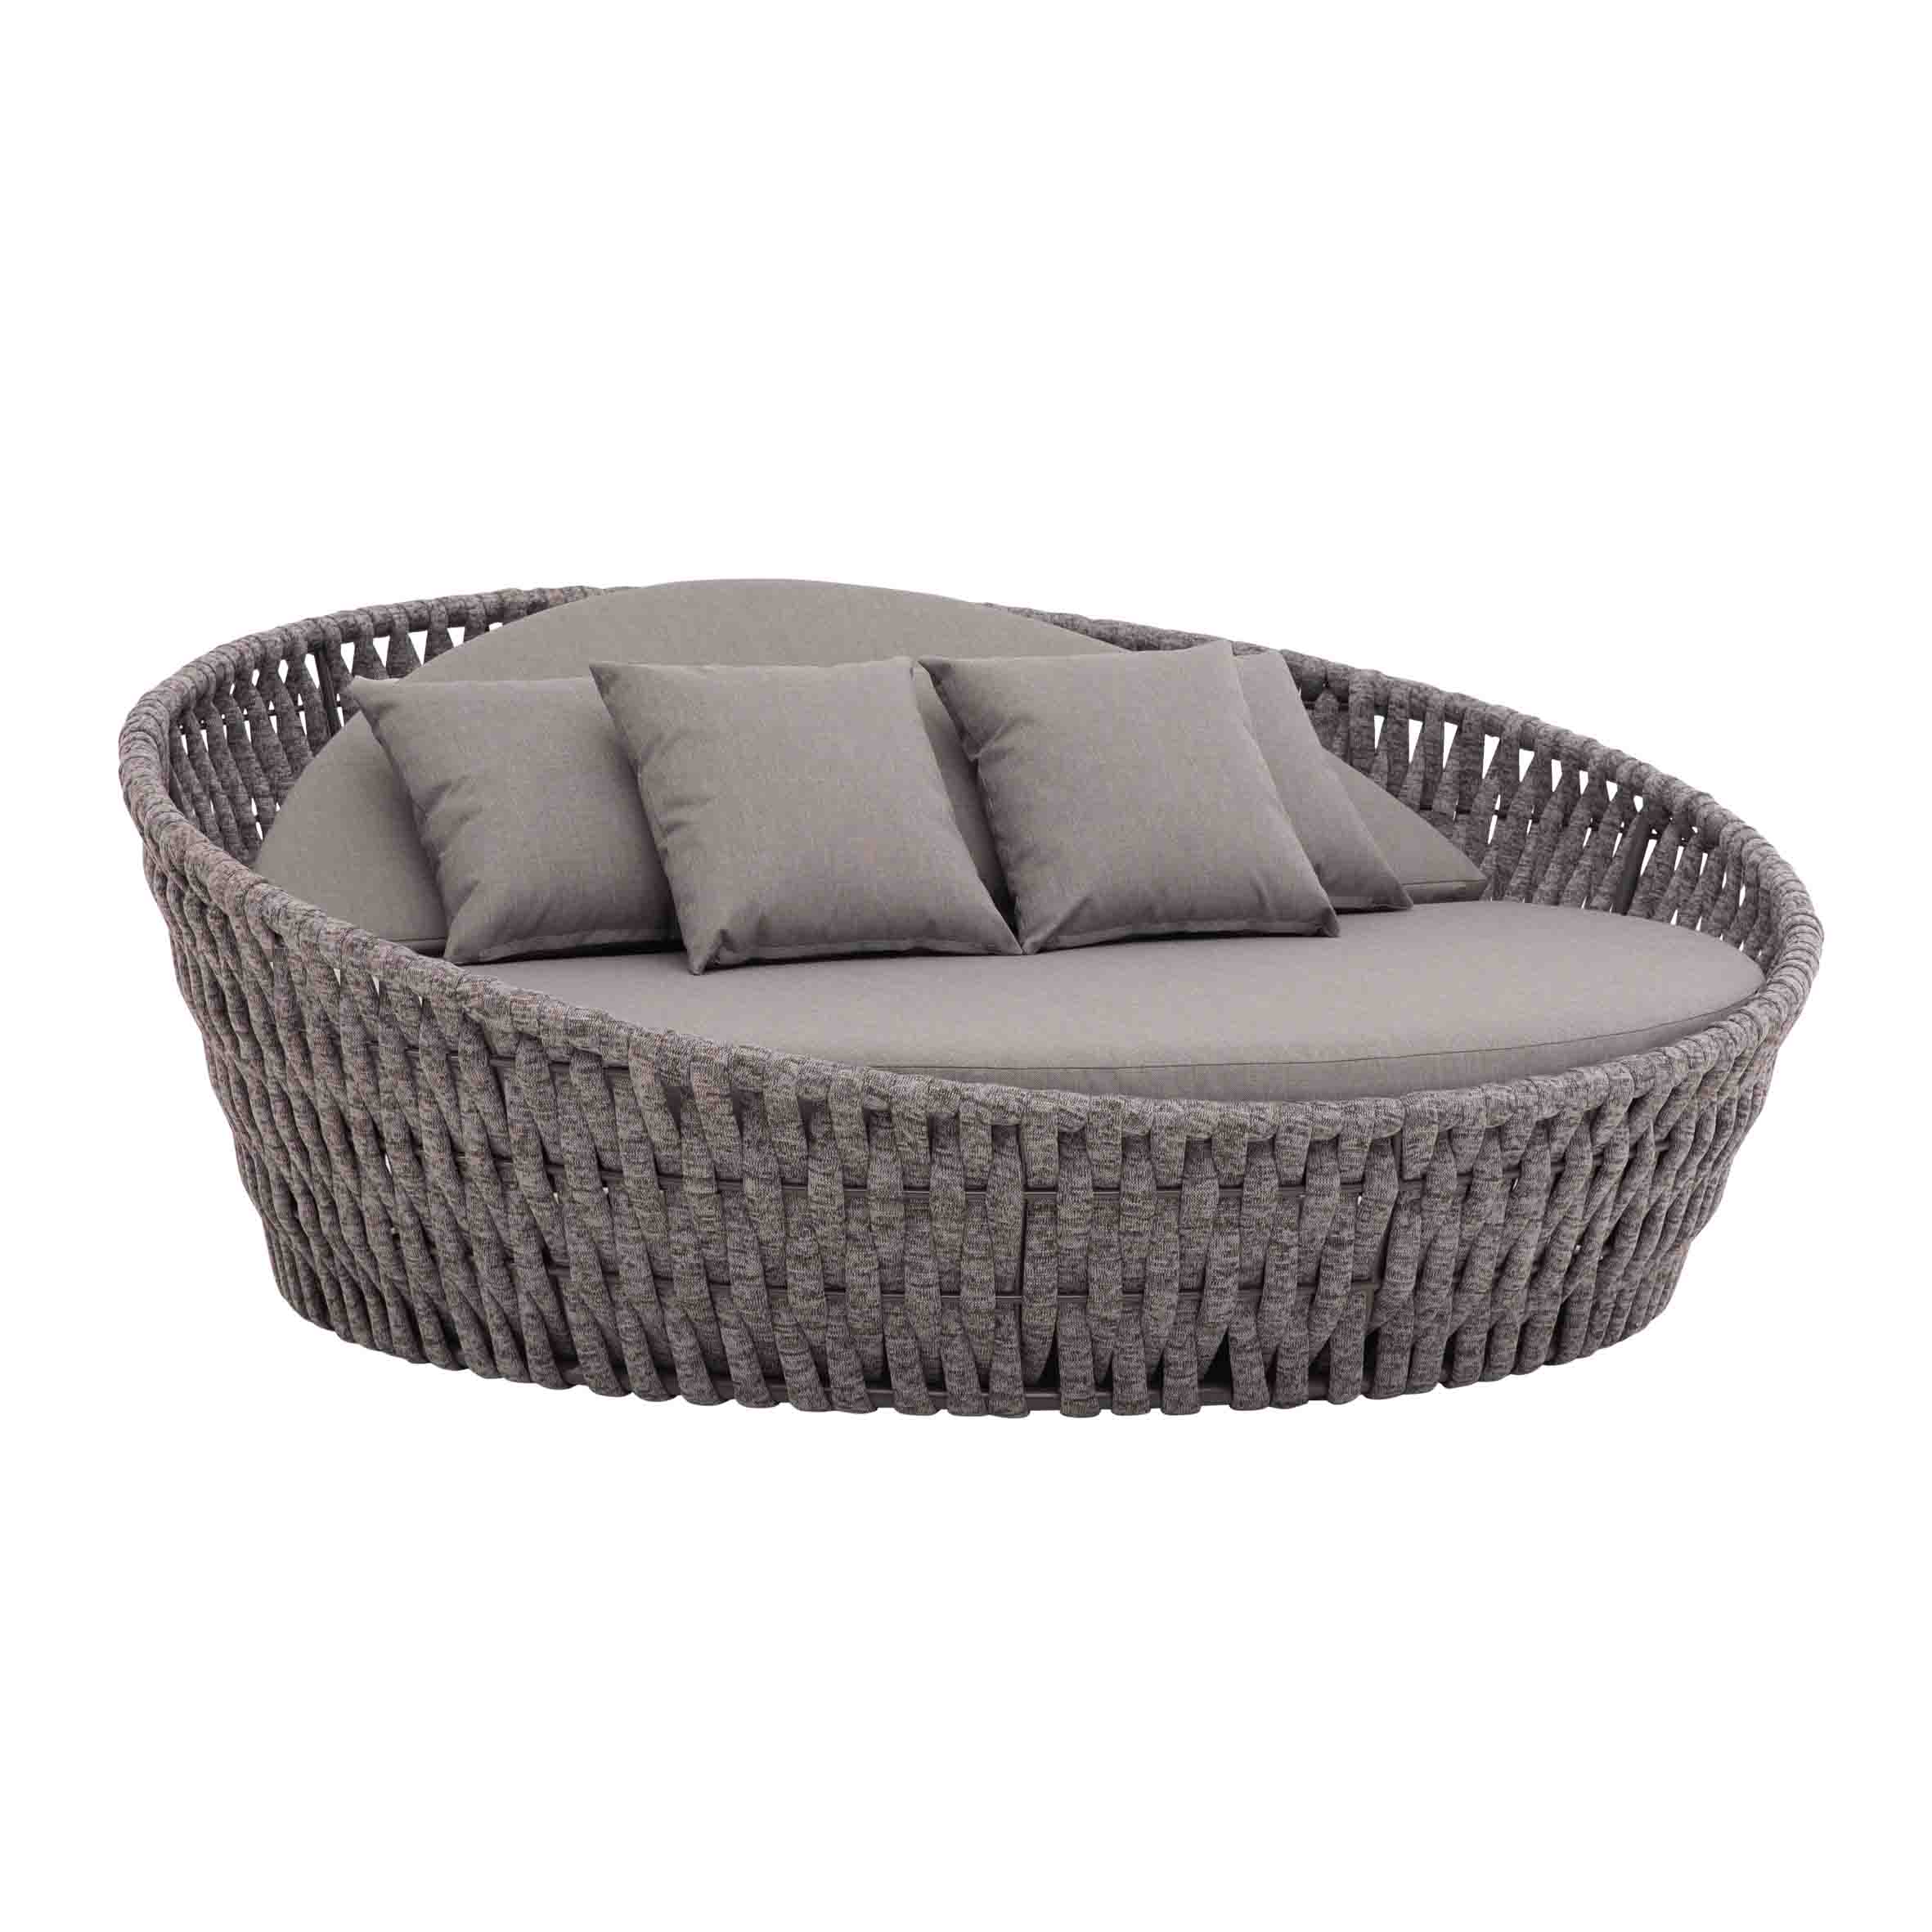 Art rope round daybed S9